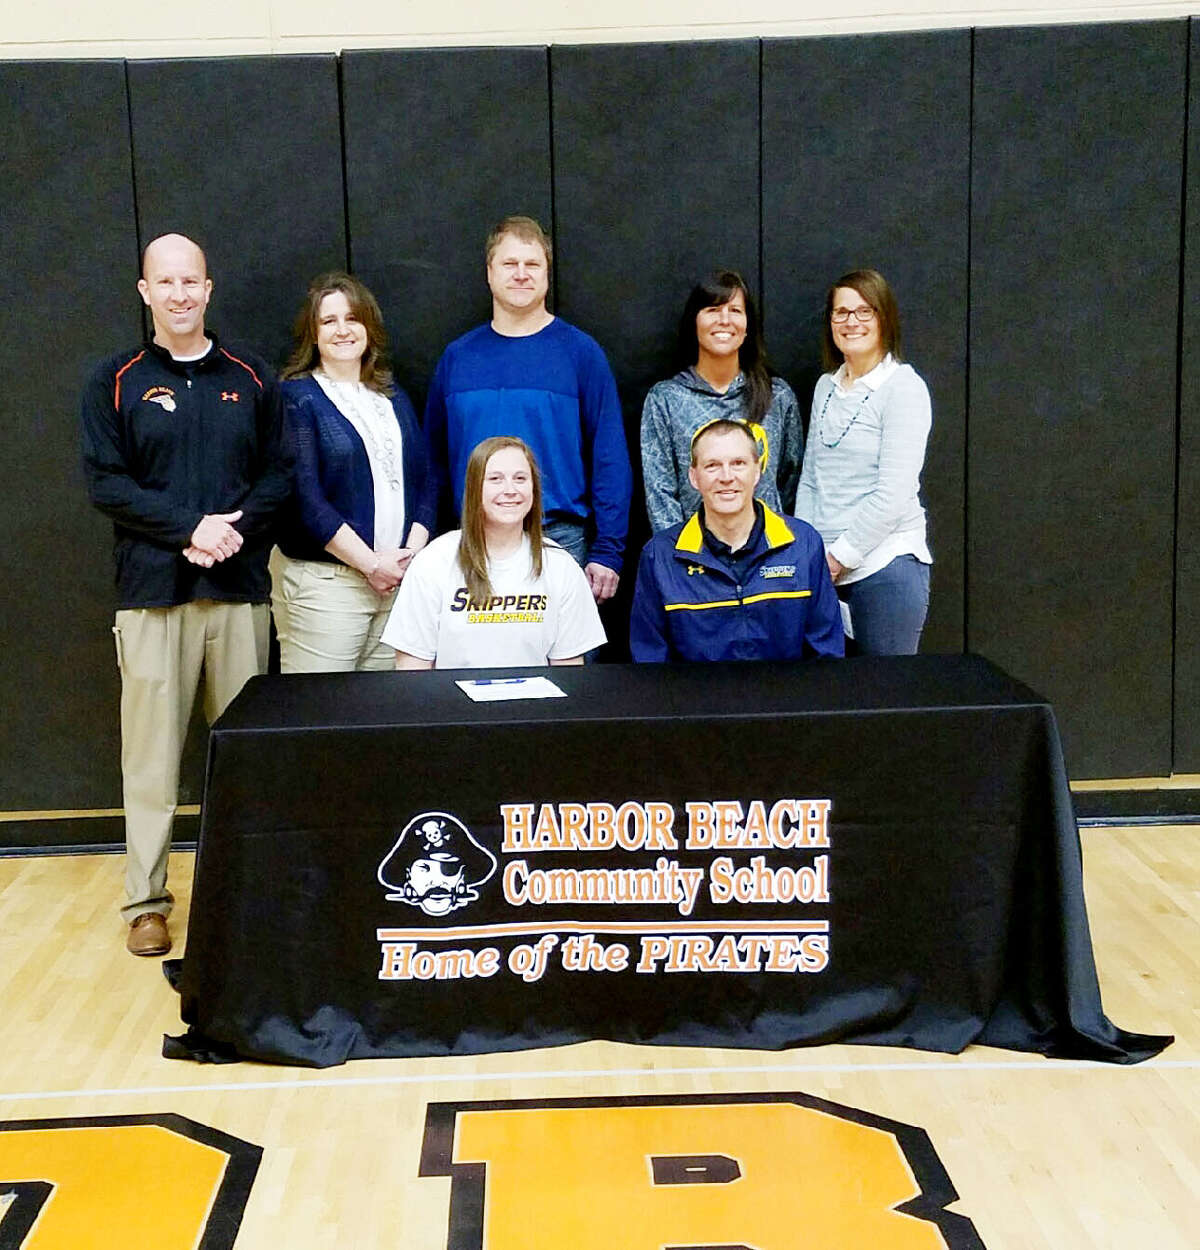   Harbor Beach’s McKenna Wolschleger signed her National Letter of Intent to play basketball at St. Clair County Community College next year. In the front row is McKenna Wolschleger and SC4 women’s basketball coach Chris Huss (back row from left) is Harbor Beach coach Jim Tamlyn, Connie Wolschleger, Darrin Wolschleger Tanya Huss and Harbor Beach junior varsity girls basketball Ellynne Volmering.